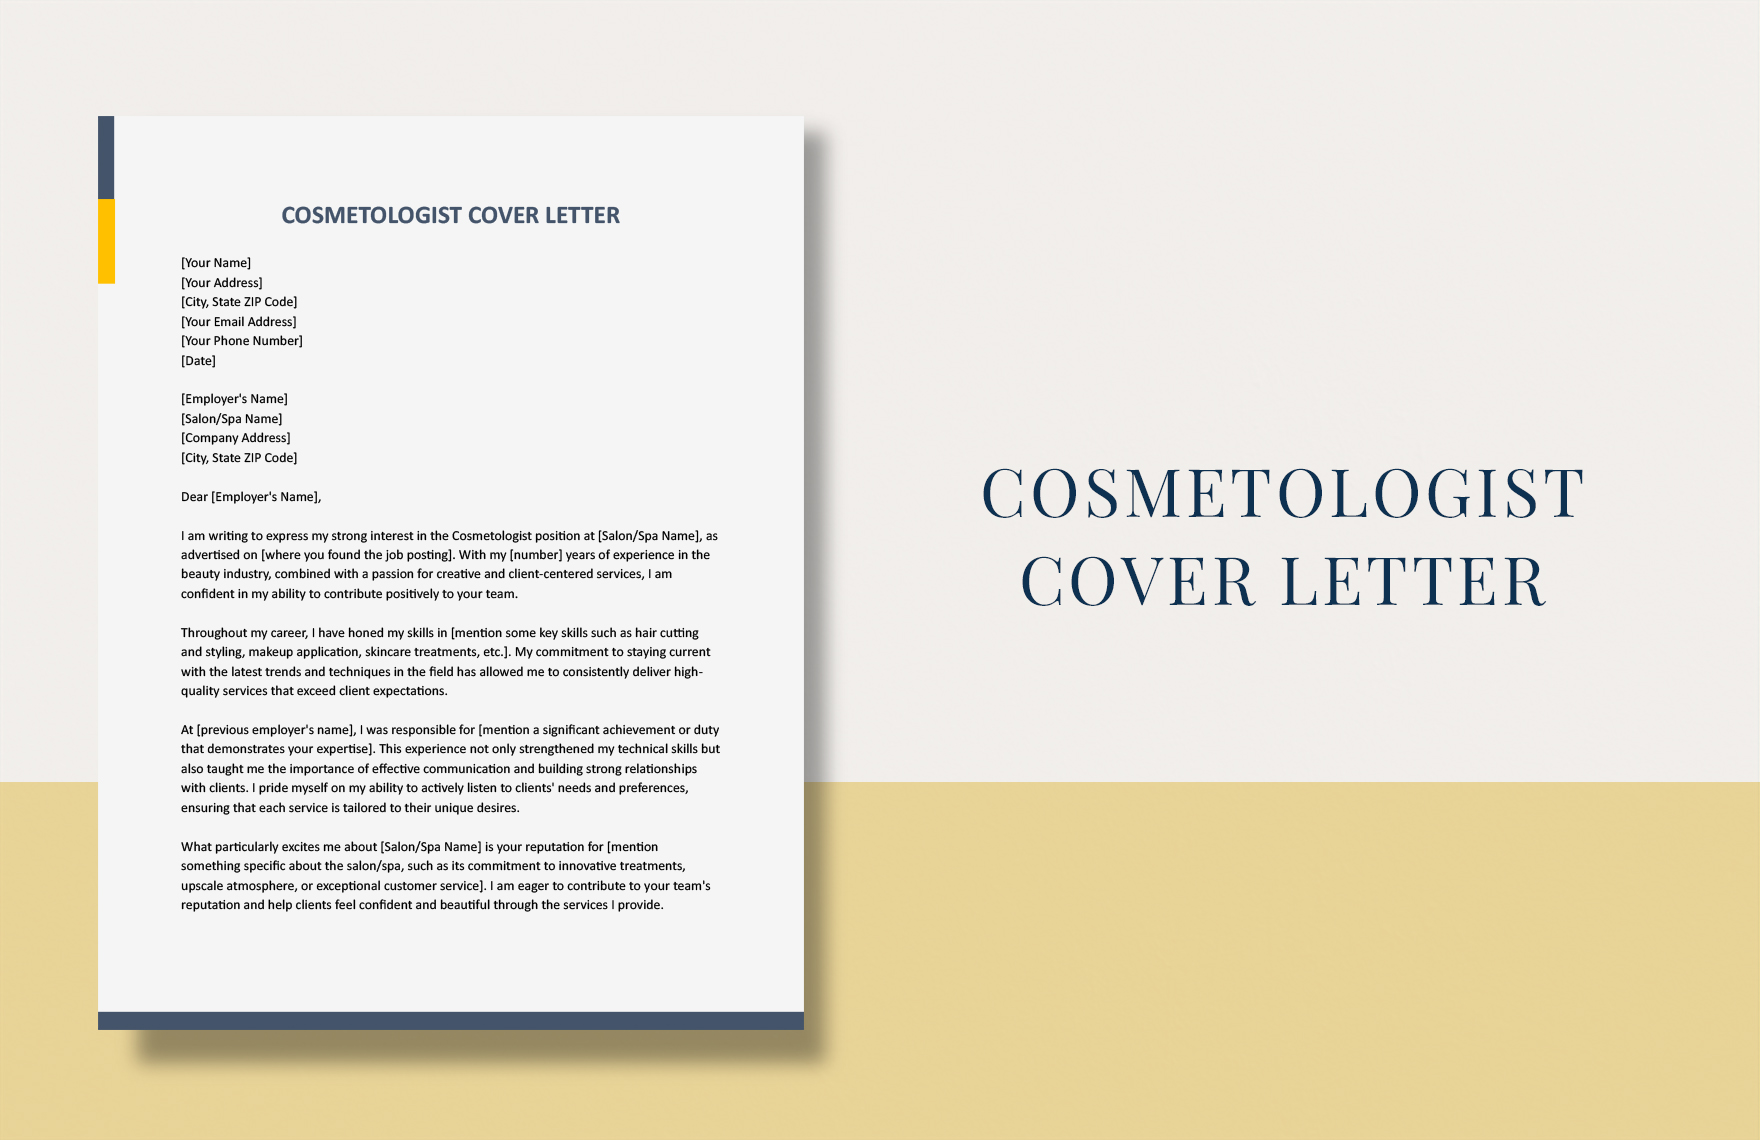 Cosmetologist Cover Letter in Word, Google Docs - Download | Template.net